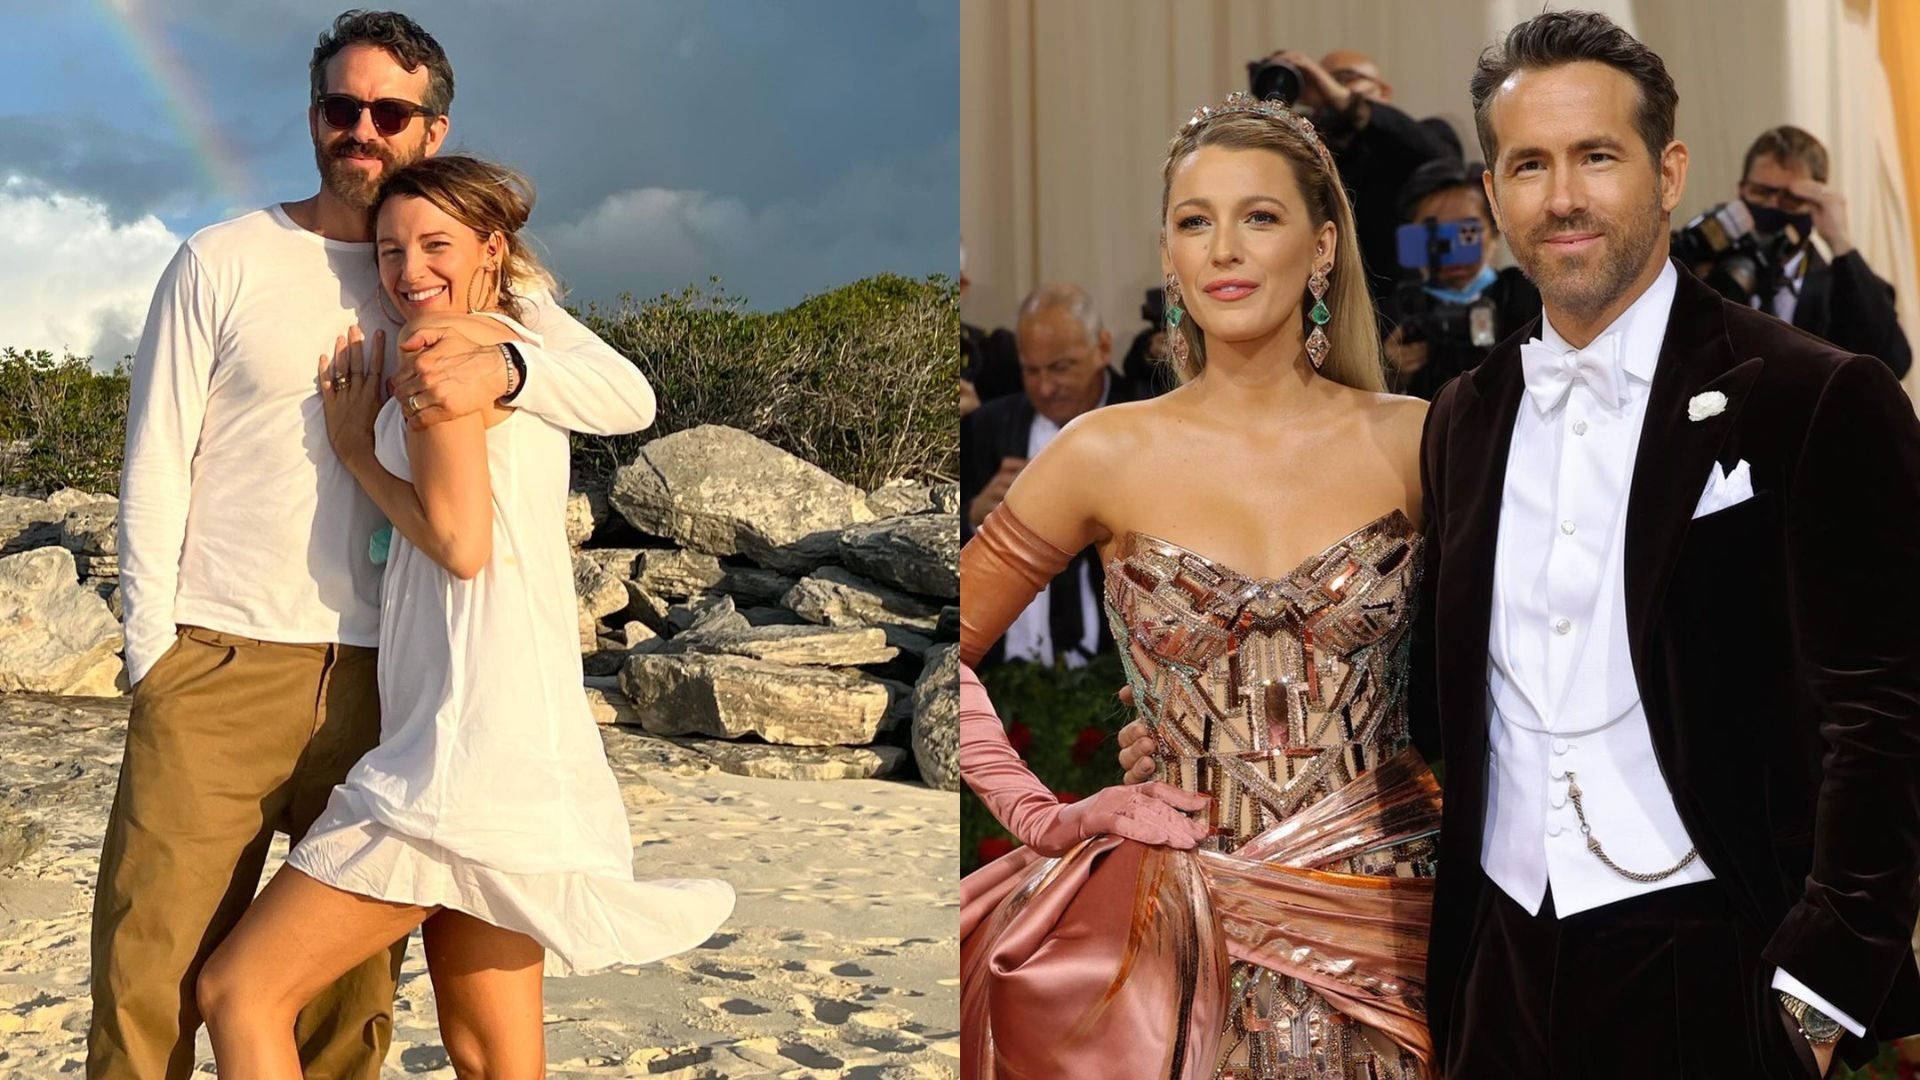 A Look At Ryan Reynolds And Blake Lively's Relationship Timeline